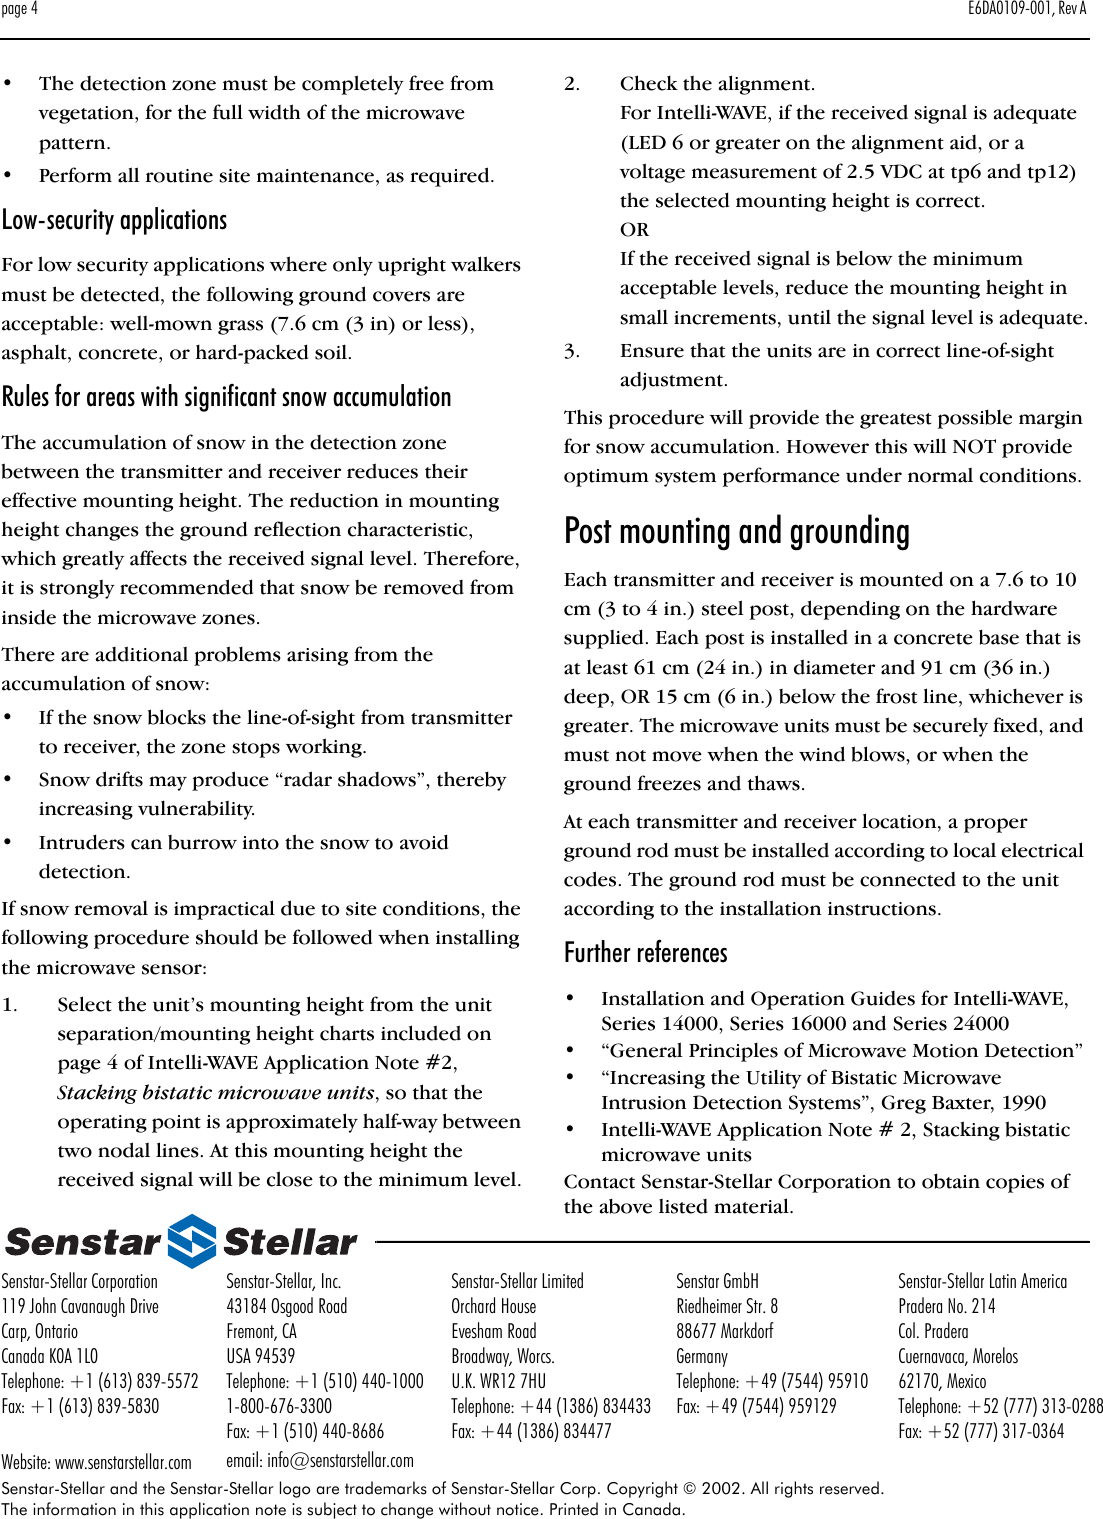 page 4 E6DA0109-001, Rev A Senstar-Stellar and the Senstar-Stellar logo are trademarks of Senstar-Stellar Corp. Copyright © 2002. All rights reserved. The information in this application note is subject to change without notice. Printed in Canada.Senstar-Stellar Corporation119 John Cavanaugh DriveCarp, OntarioCanada K0A 1L0Telephone: +1 (613) 839-5572Fax: +1 (613) 839-5830Website: www.senstarstellar.comSenstar-Stellar, Inc.43184 Osgood RoadFremont, CAUSA 94539Telephone: +1 (510) 440-10001-800-676-3300Fax: +1 (510) 440-8686email: info@senstarstellar.comSenstar-Stellar LimitedOrchard HouseEvesham RoadBroadway, Worcs.U.K. WR12 7HUTelephone: +44 (1386) 834433Fax: +44 (1386) 834477Senstar GmbHRiedheimer Str. 888677 MarkdorfGermanyTelephone: +49 (7544) 95910Fax: +49 (7544) 959129Senstar-Stellar Latin AmericaPradera No. 214Col. PraderaCuernavaca, Morelos62170, MexicoTelephone: +52 (777) 313-0288Fax: +52 (777) 317-0364•The detection zone must be completely free from vegetation, for the full width of the microwave pattern.•Perform all routine site maintenance, as required.Low-security applicationsFor low security applications where only upright walkers must be detected, the following ground covers are acceptable: well-mown grass (7.6 cm (3 in) or less), asphalt, concrete, or hard-packed soil.Rules for areas with significant snow accumulationThe accumulation of snow in the detection zone between the transmitter and receiver reduces their effective mounting height. The reduction in mounting height changes the ground reflection characteristic, which greatly affects the received signal level. Therefore, it is strongly recommended that snow be removed from inside the microwave zones.There are additional problems arising from the accumulation of snow:•If the snow blocks the line-of-sight from transmitter to receiver, the zone stops working.•Snow drifts may produce “radar shadows”, thereby increasing vulnerability.•Intruders can burrow into the snow to avoid detection.If snow removal is impractical due to site conditions, the following procedure should be followed when installing the microwave sensor:1. Select the unit’s mounting height from the unit separation/mounting height charts included on page 4 of Intelli-WAVE Application Note #2, Stacking bistatic microwave units, so that the operating point is approximately half-way between two nodal lines. At this mounting height the received signal will be close to the minimum level.2. Check the alignment.For Intelli-WAVE, if the received signal is adequate (LED 6 or greater on the alignment aid, or a voltage measurement of 2.5 VDC at tp6 and tp12) the selected mounting height is correct.ORIf the received signal is below the minimum acceptable levels, reduce the mounting height in small increments, until the signal level is adequate.3. Ensure that the units are in correct line-of-sight adjustment.This procedure will provide the greatest possible margin for snow accumulation. However this will NOT provide optimum system performance under normal conditions.Post mounting and groundingEach transmitter and receiver is mounted on a 7.6 to 10 cm (3 to 4 in.) steel post, depending on the hardware supplied. Each post is installed in a concrete base that is at least 61 cm (24 in.) in diameter and 91 cm (36 in.) deep, OR 15 cm (6 in.) below the frost line, whichever is greater. The microwave units must be securely fixed, and must not move when the wind blows, or when the ground freezes and thaws.At each transmitter and receiver location, a proper ground rod must be installed according to local electrical codes. The ground rod must be connected to the unit according to the installation instructions.Further references•Installation and Operation Guides for Intelli-WAVE, Series 14000, Series 16000 and Series 24000•“General Principles of Microwave Motion Detection”•“Increasing the Utility of Bistatic Microwave Intrusion Detection Systems”, Greg Baxter, 1990•Intelli-WAVE Application Note # 2, Stacking bistatic microwave unitsContact Senstar-Stellar Corporation to obtain copies of the above listed material.